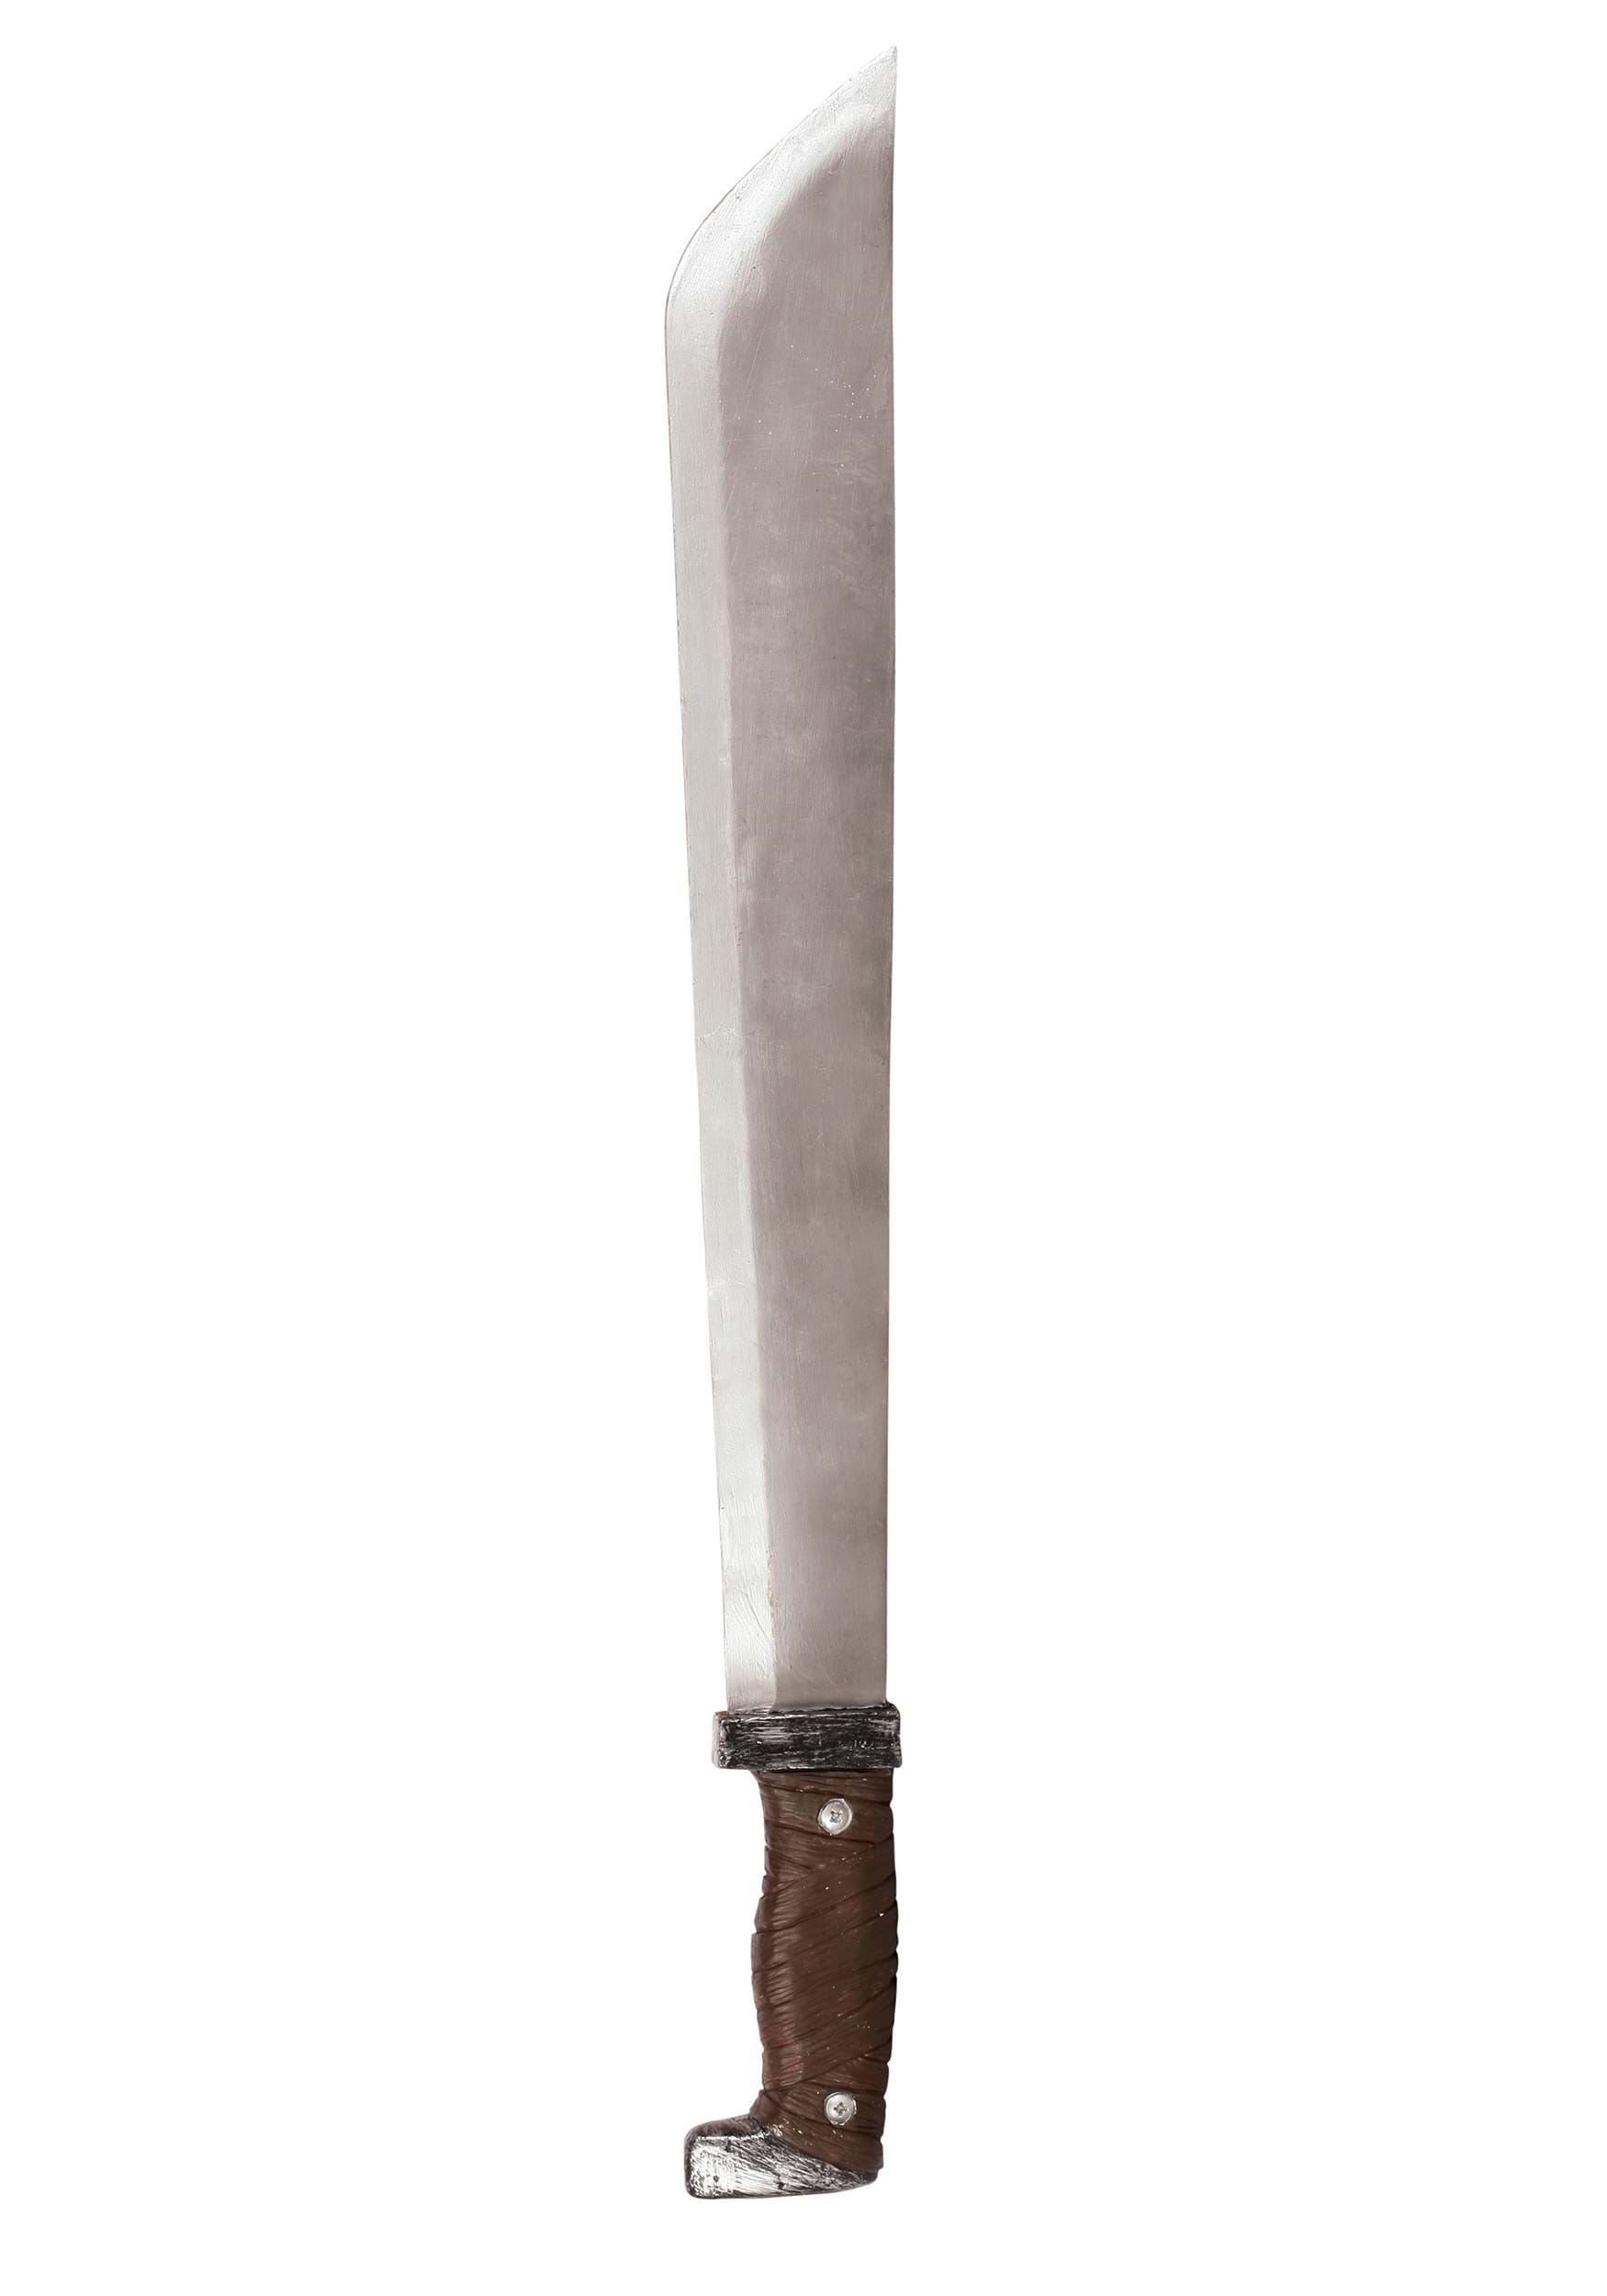 https://images.halloweencostumes.com/products/73748/1-1/realistic-looking-machete-knife.jpg